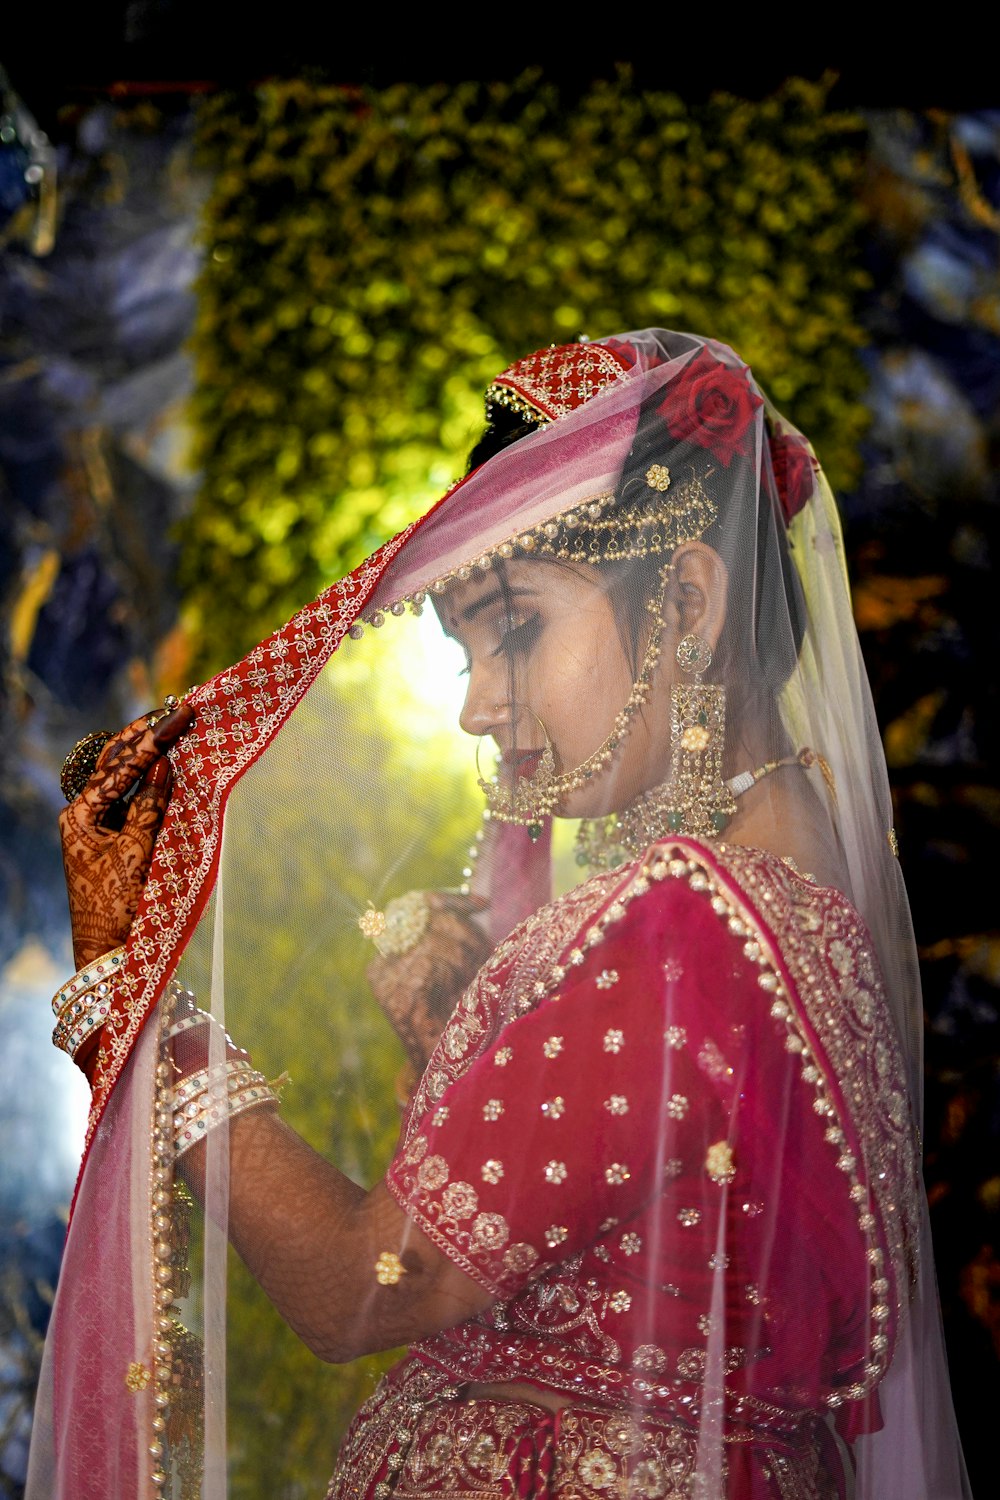 a woman in a red and gold wedding outfit